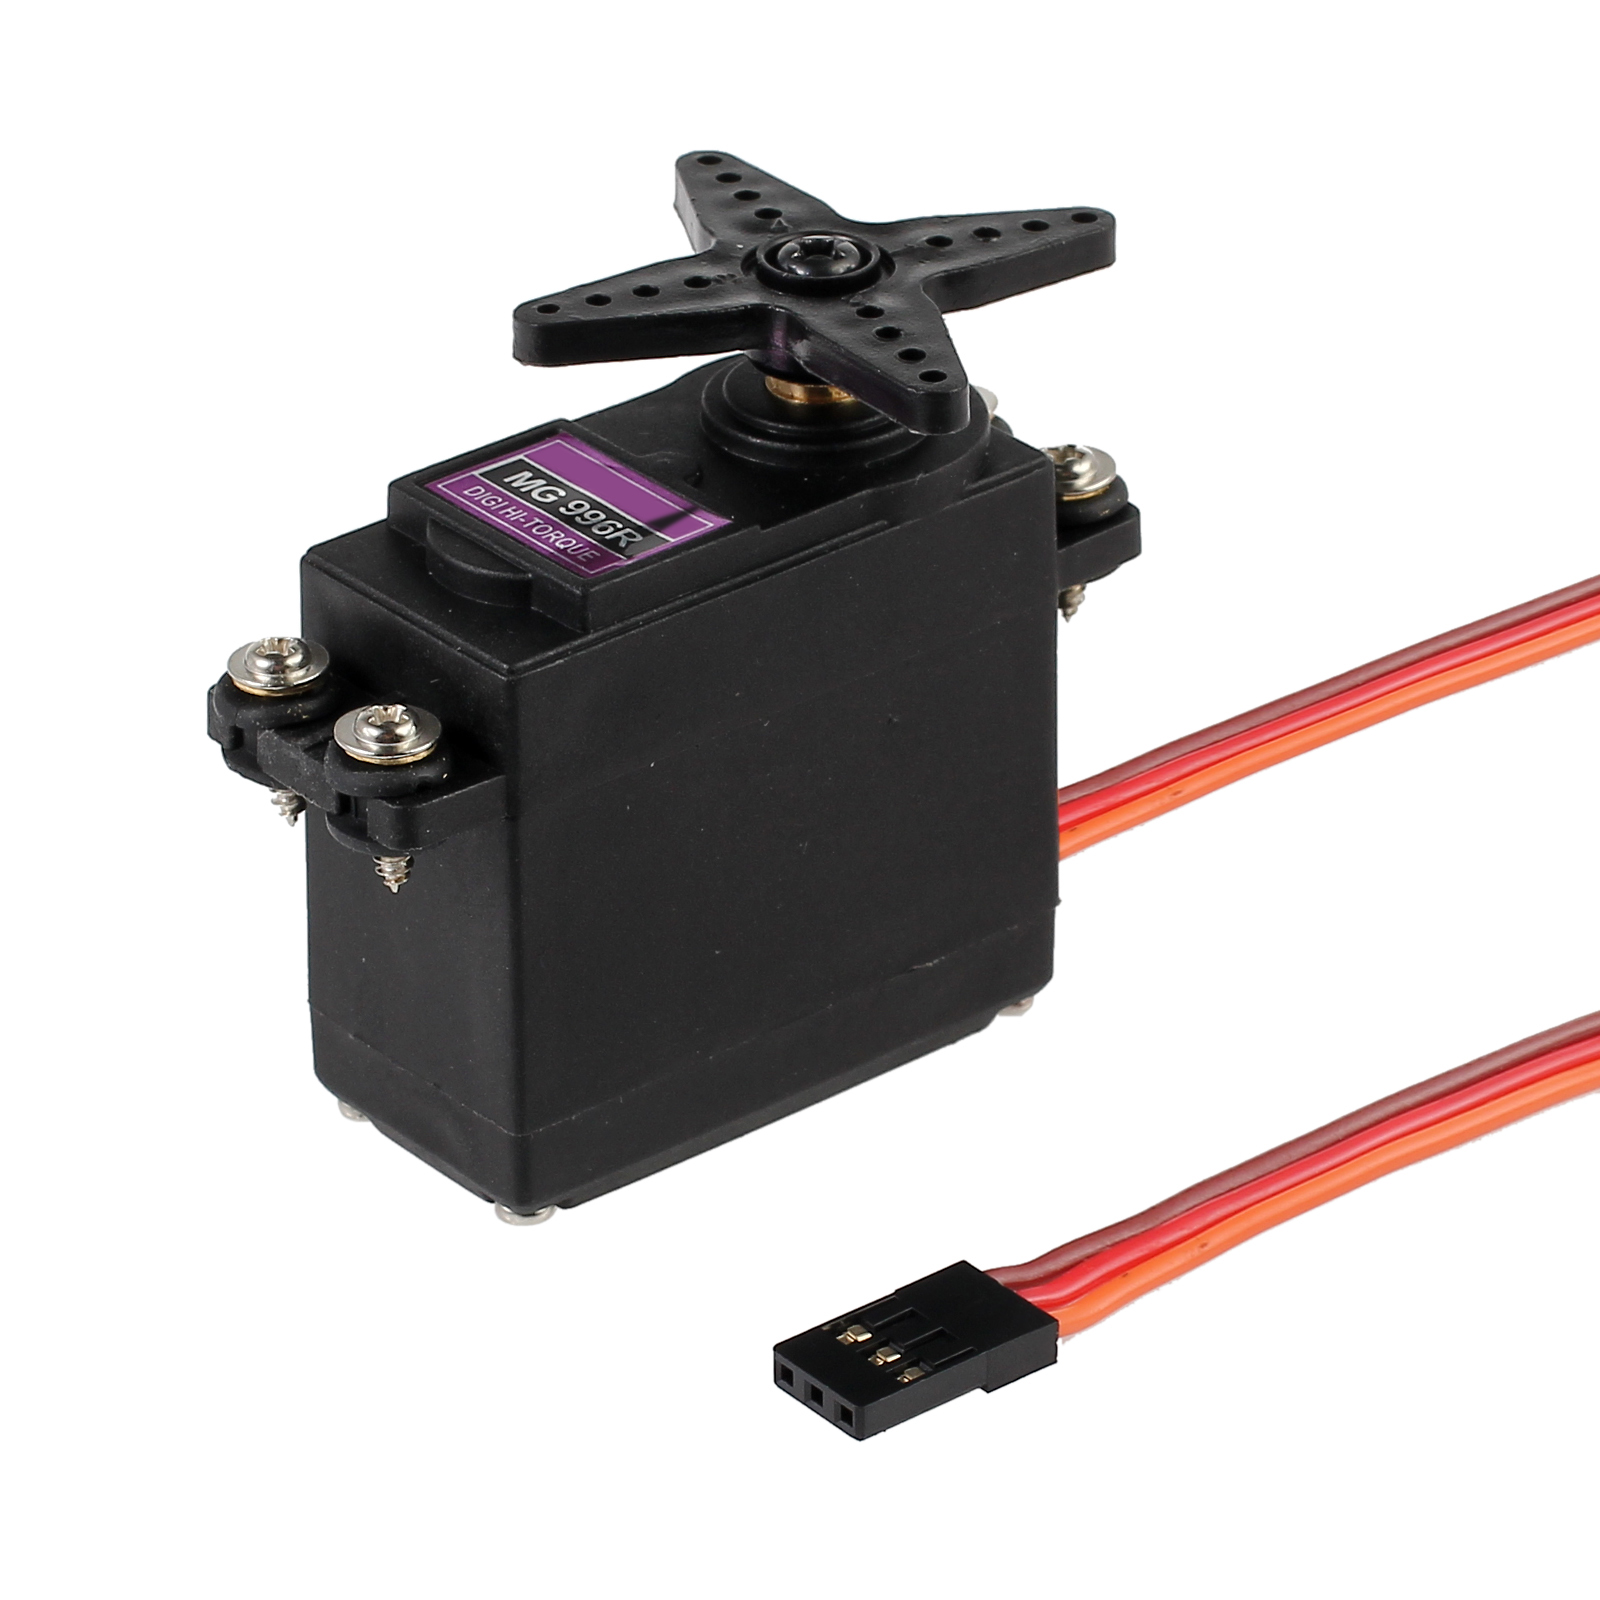 2Pcs Metal Gear MG996R Micro Servo Motor High Speed for RC Helicopter